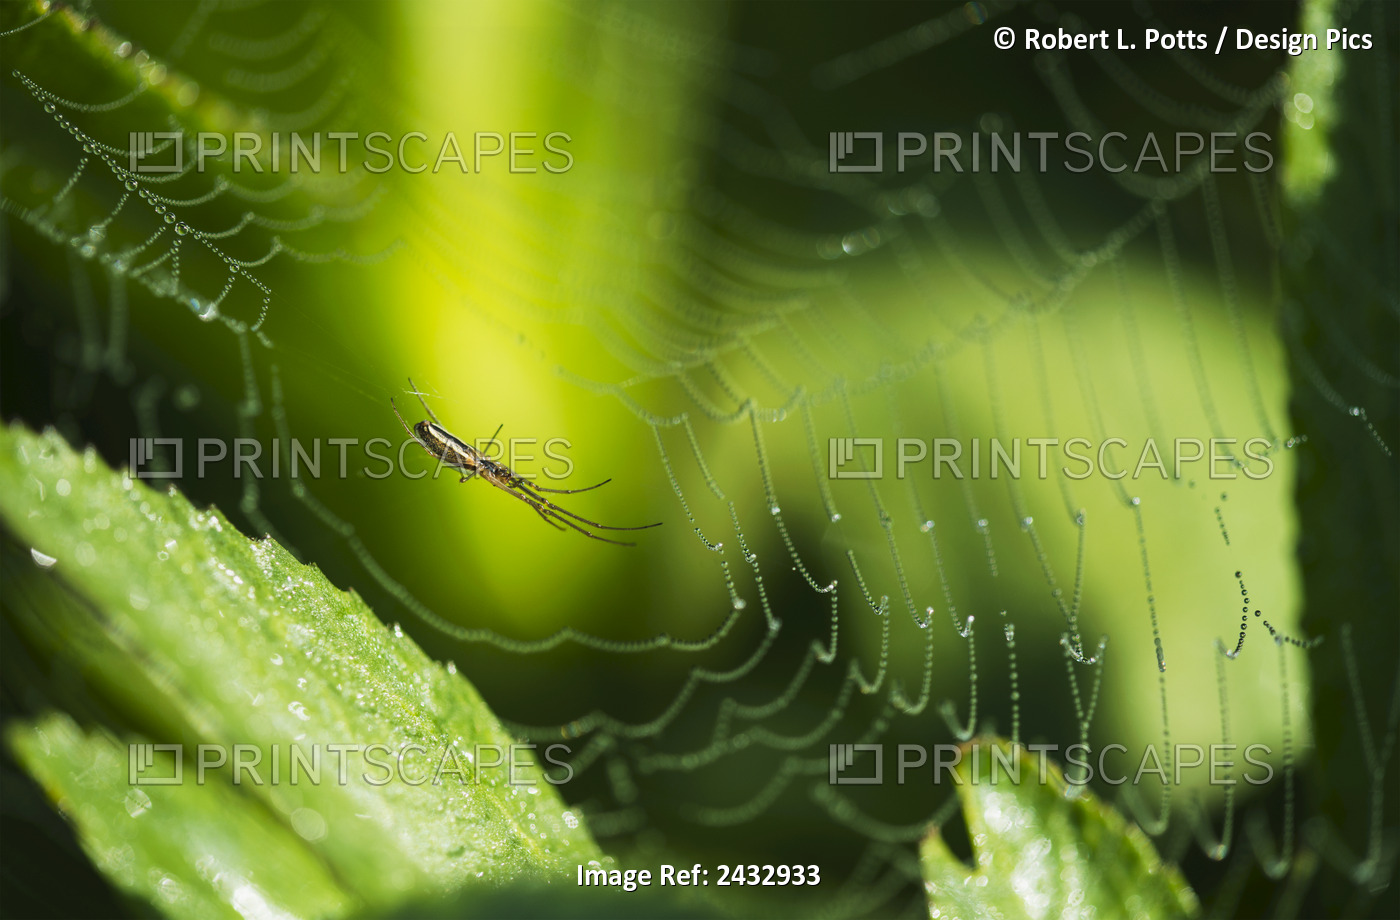 A Spider Waits In Her Web; Astoria, Oregon, United States Of America